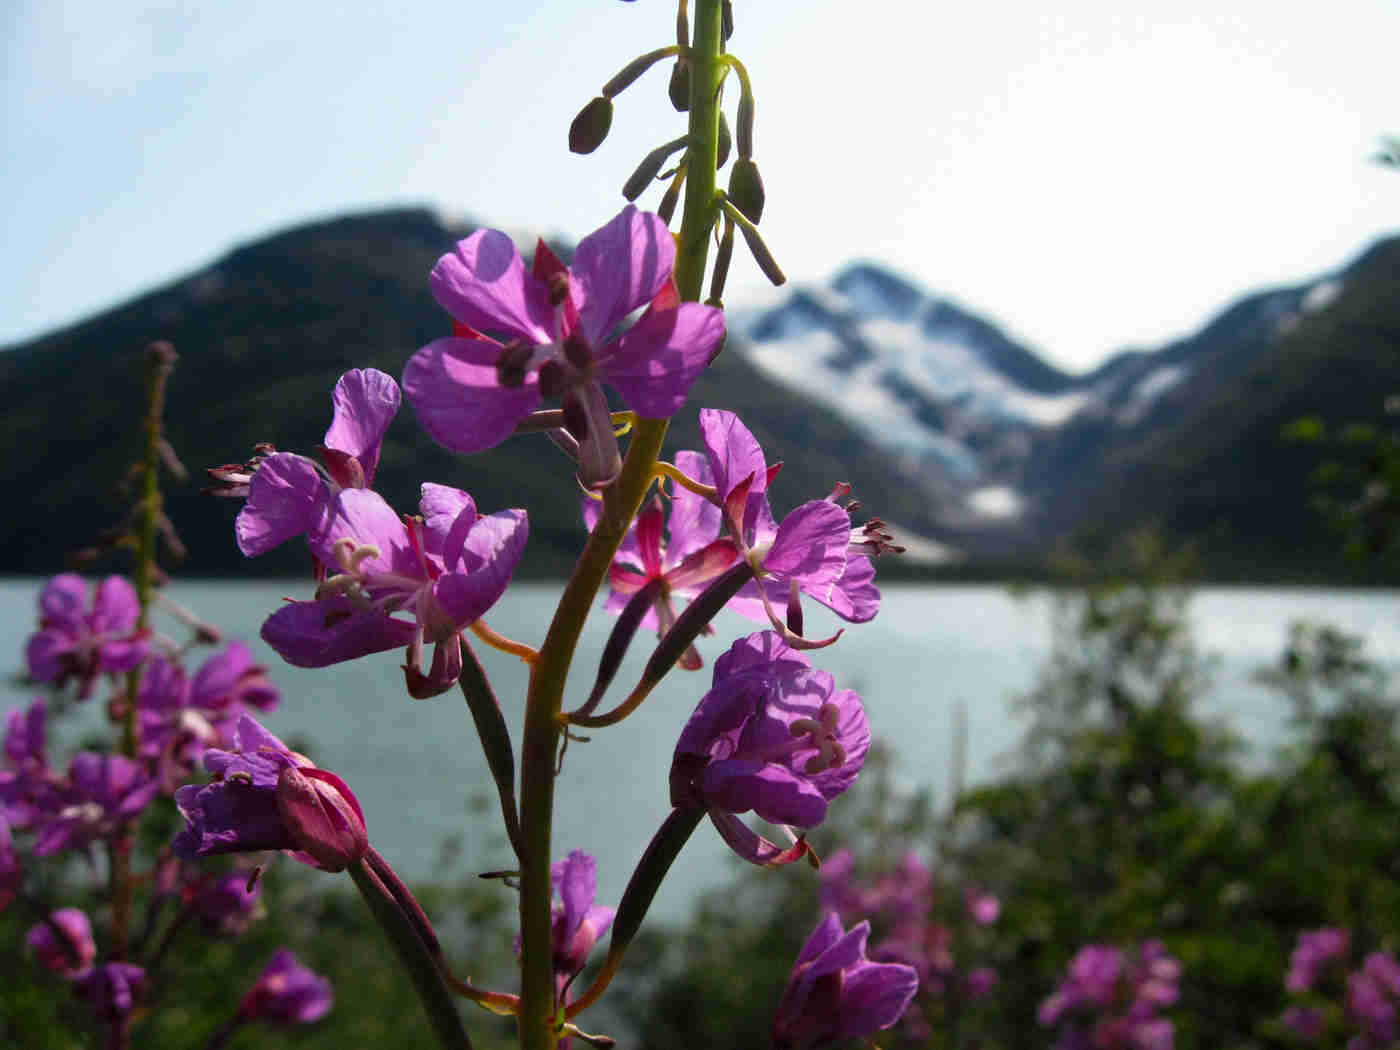 Close up view of a purple orchid plant with flowers, with blurry mountains in the background